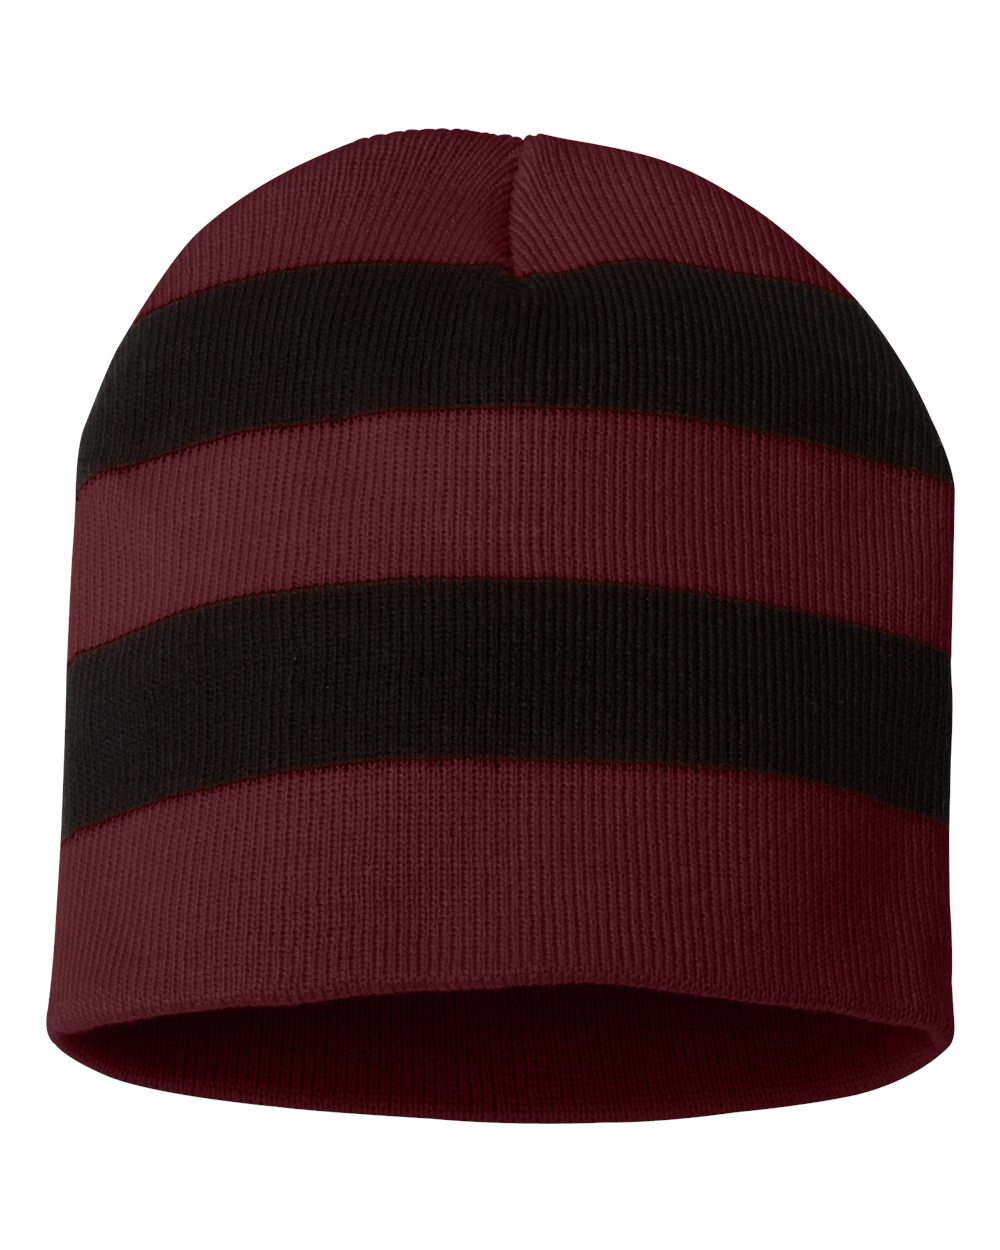 click to view Maroon/Black